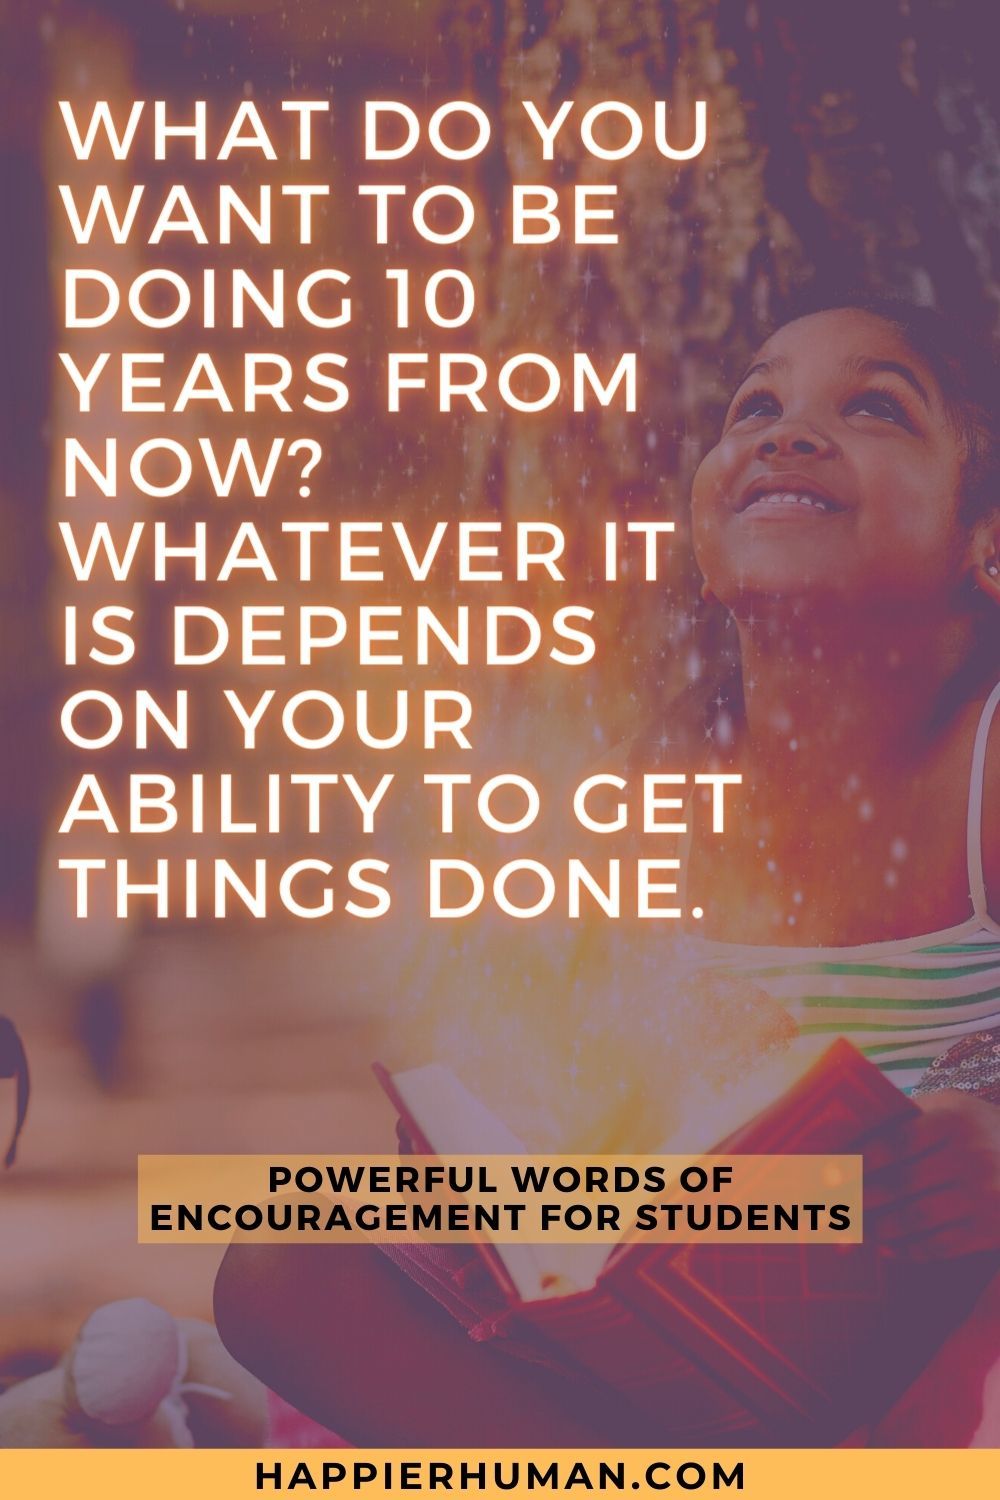 What do you want to be doing 10 years from now? Whatever it is depends on your ability to get things done. | encouraging words for students during this time | motivational quotes for students studying